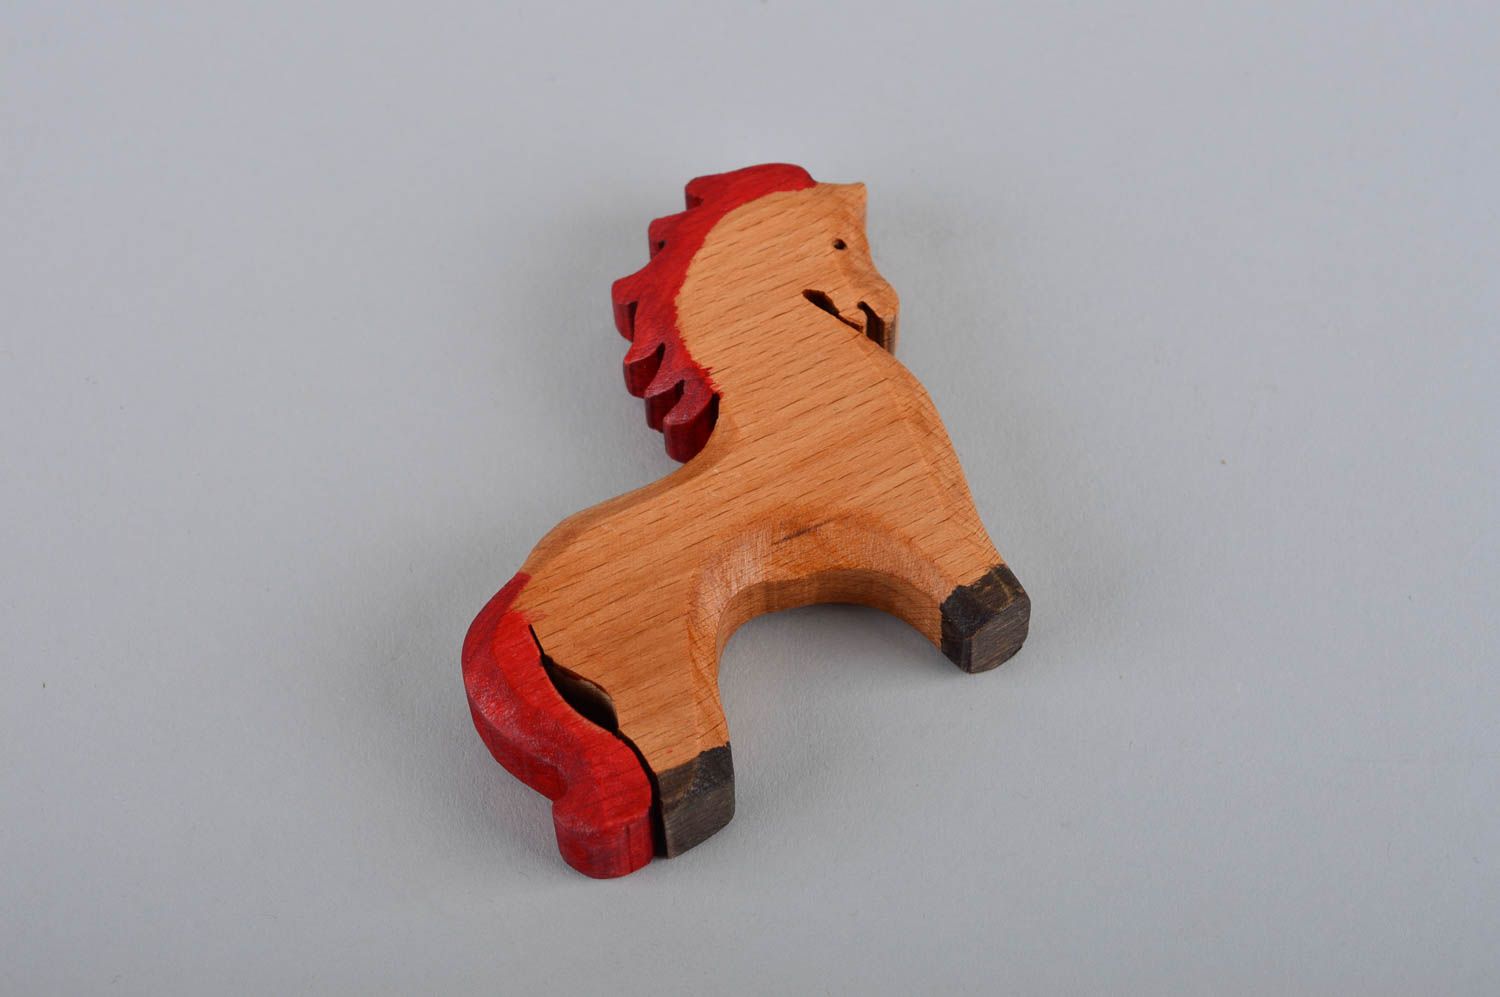 Handmade toy unusual toy for baby wooden toy designer toy nursery decor photo 5